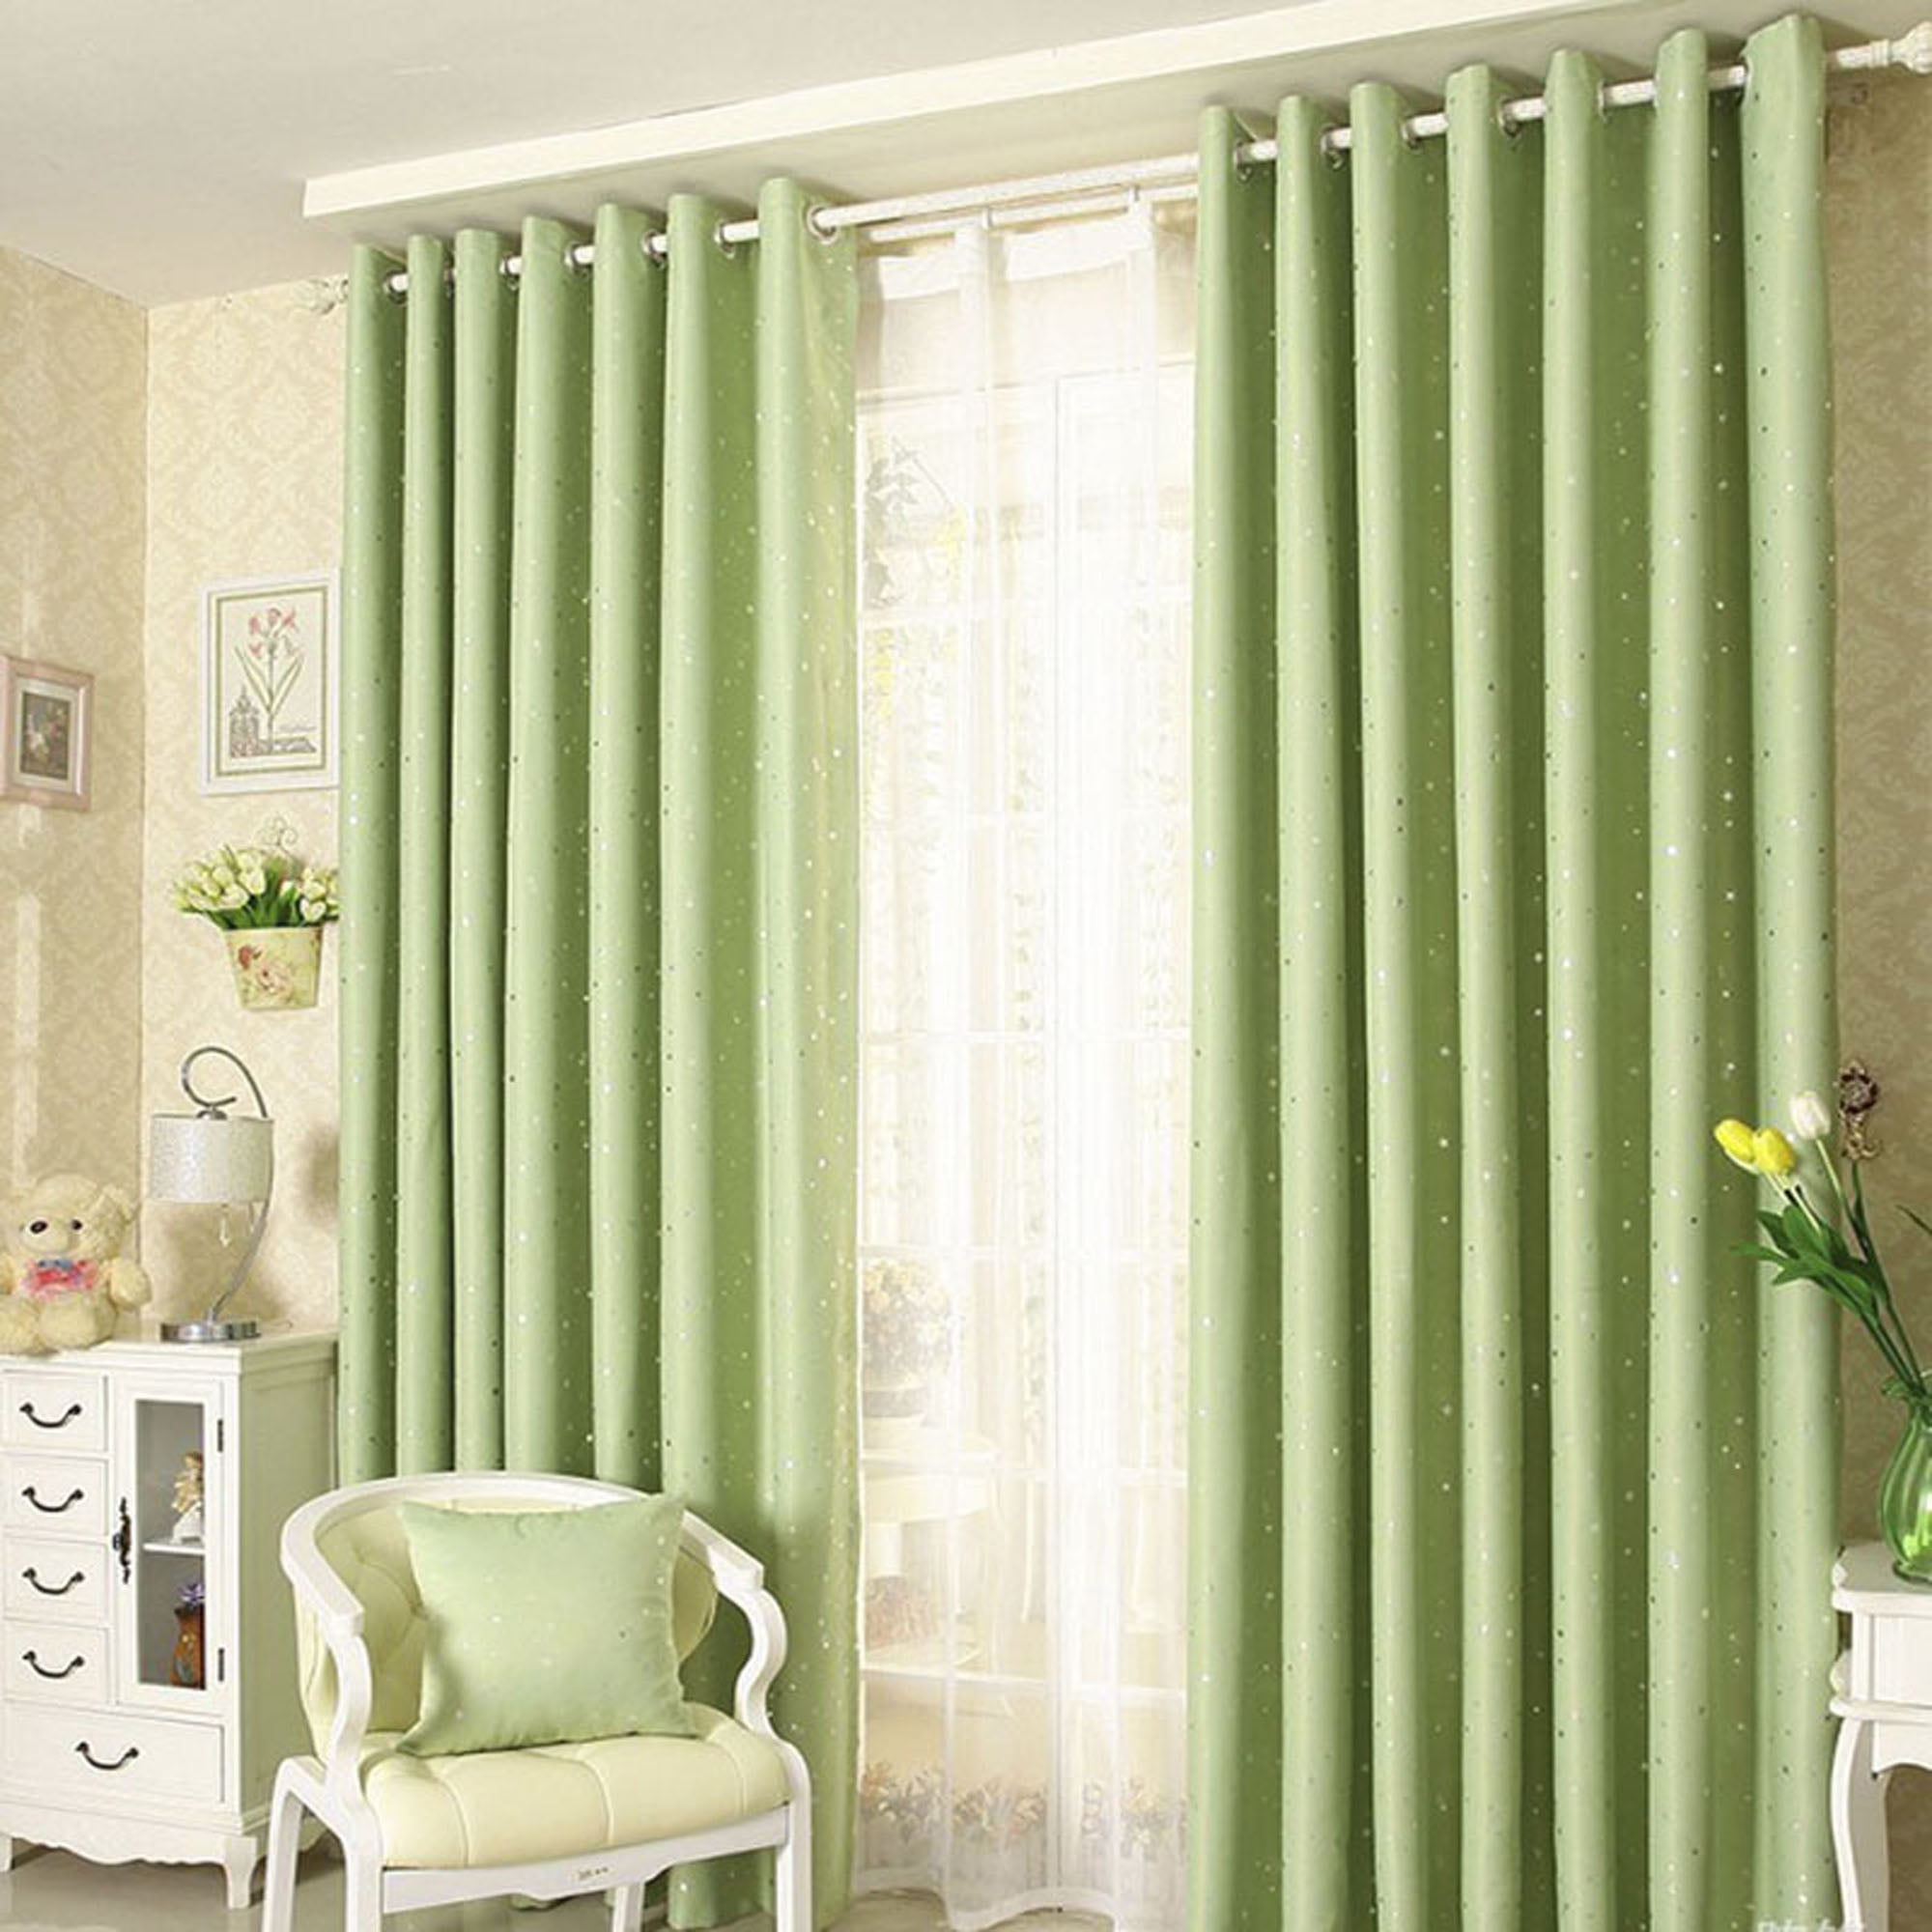 DODOING Blackout Curtains for Bedroom, Thermal Insulated Room Darkening